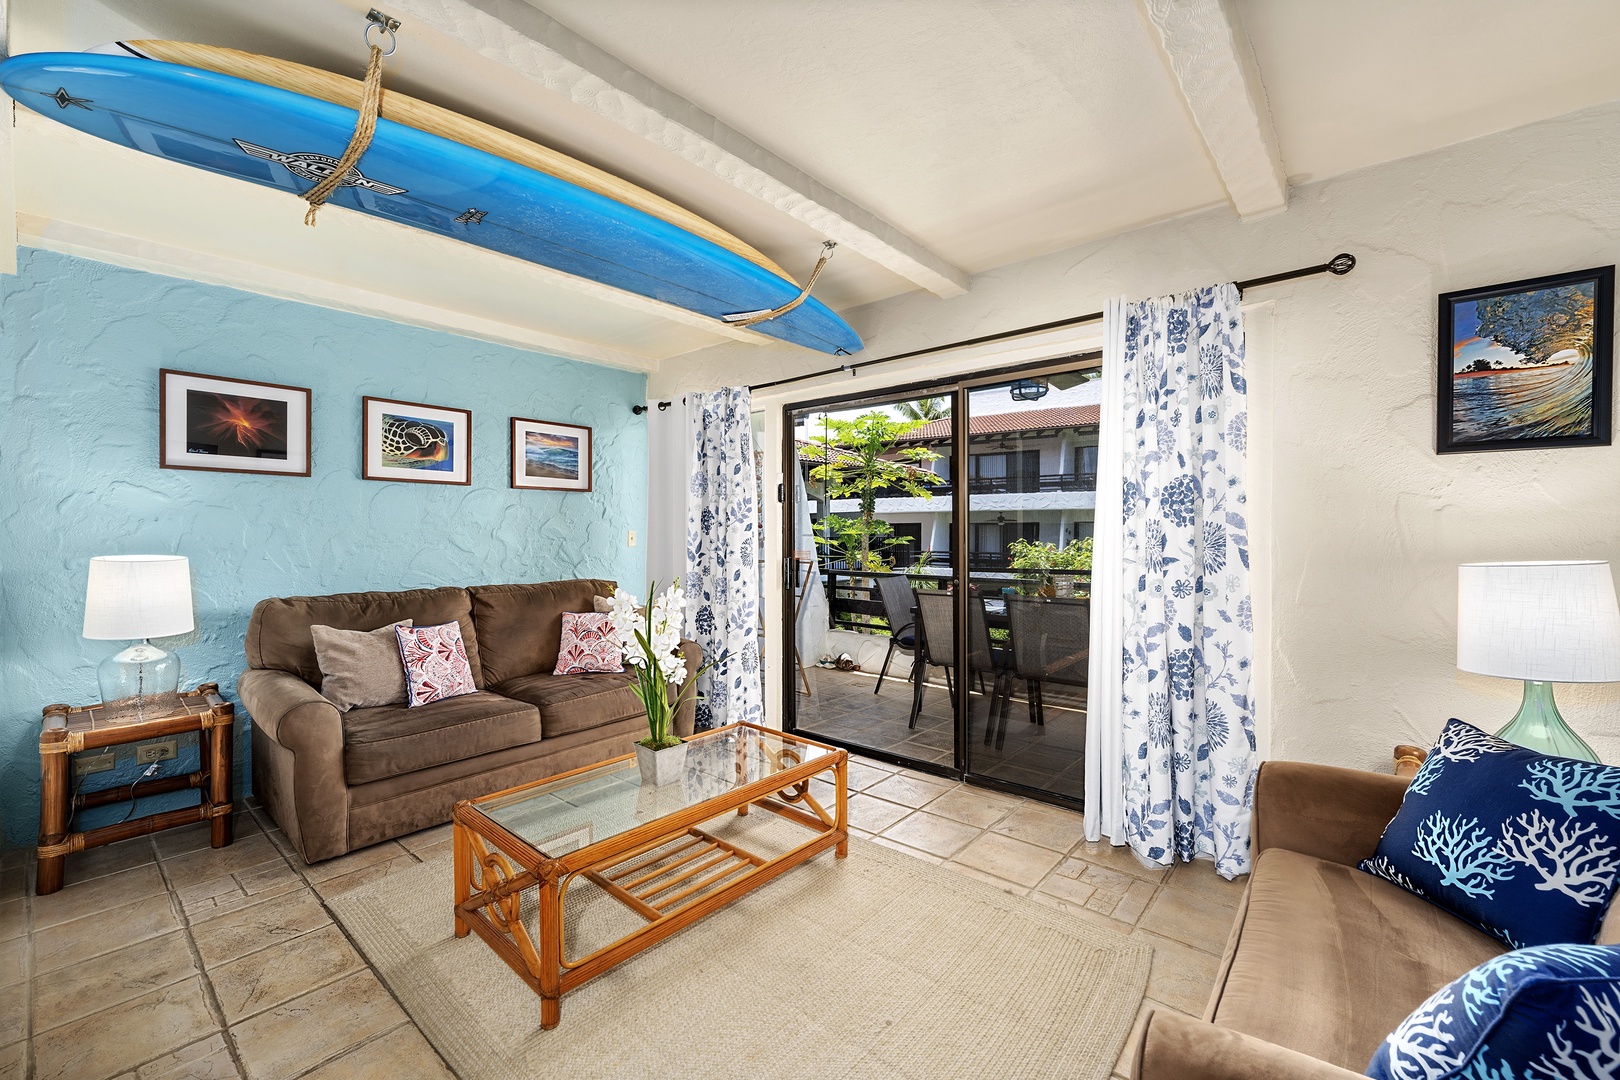 Kailua Kona Vacation Rentals, Casa De Emdeko 222 - Unit is equipped with sleeper sofas in the living room to accommodate a total of 4 guests